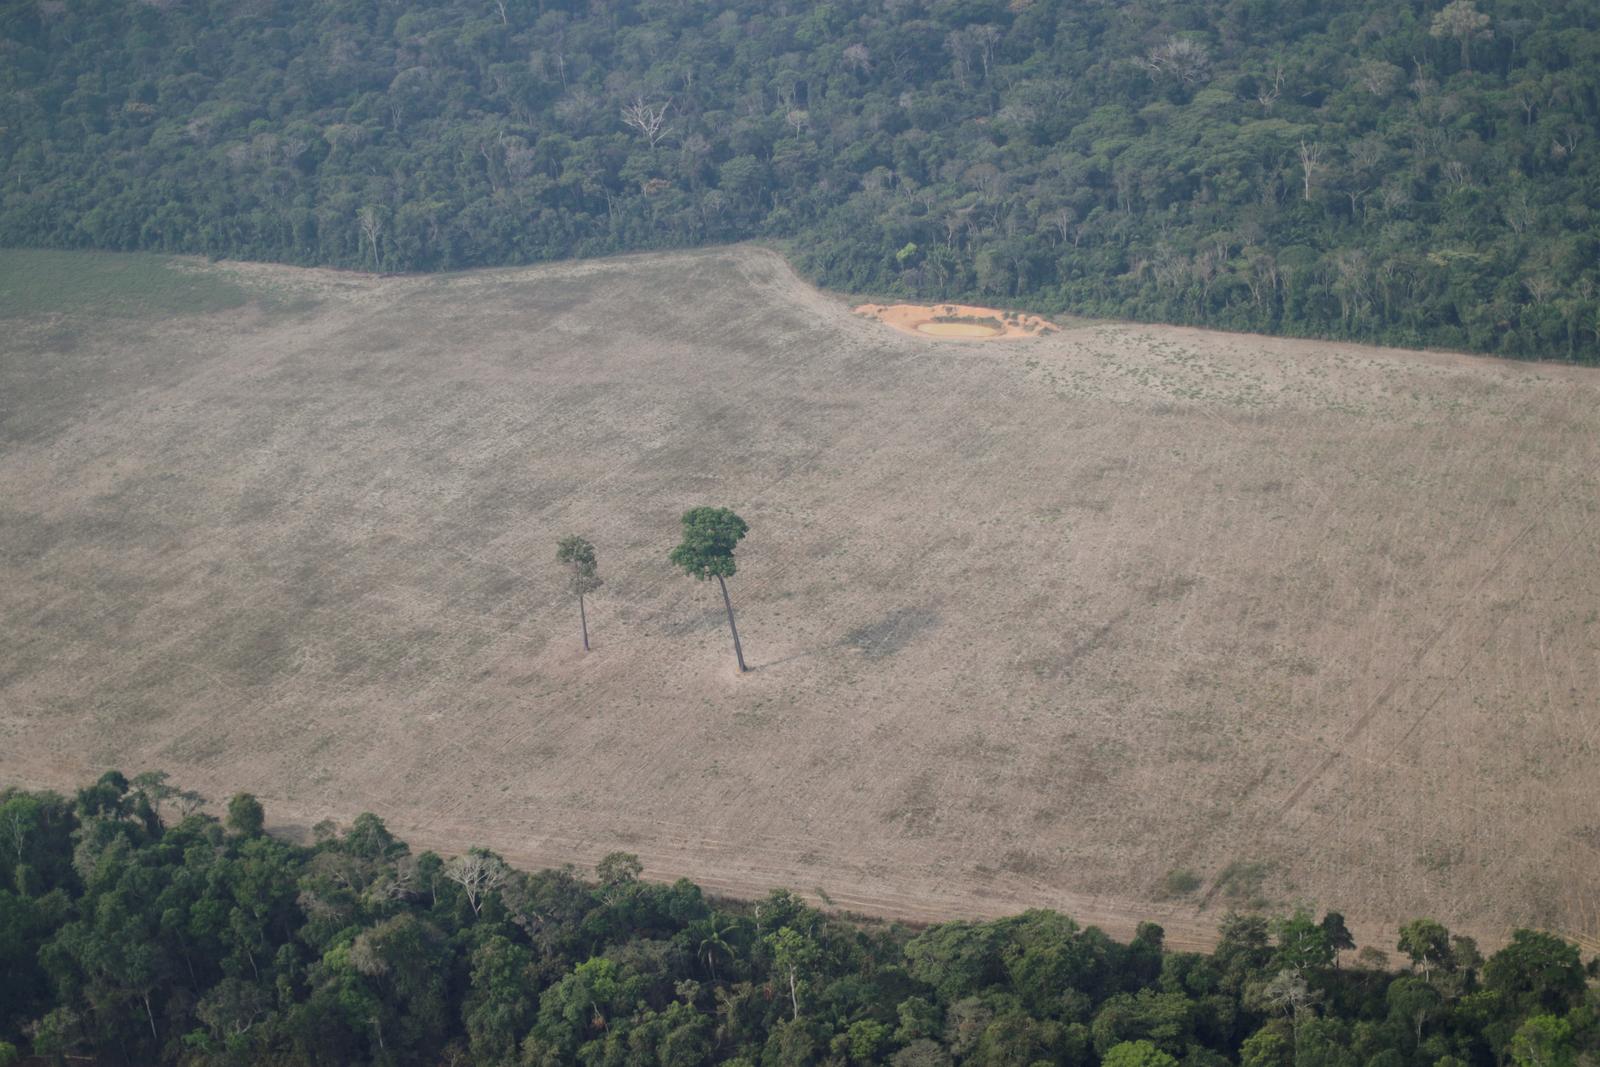 Brazil seeks $1 billion in foreign aid to curb Amazon deforestation by 30-40% -environmental minister